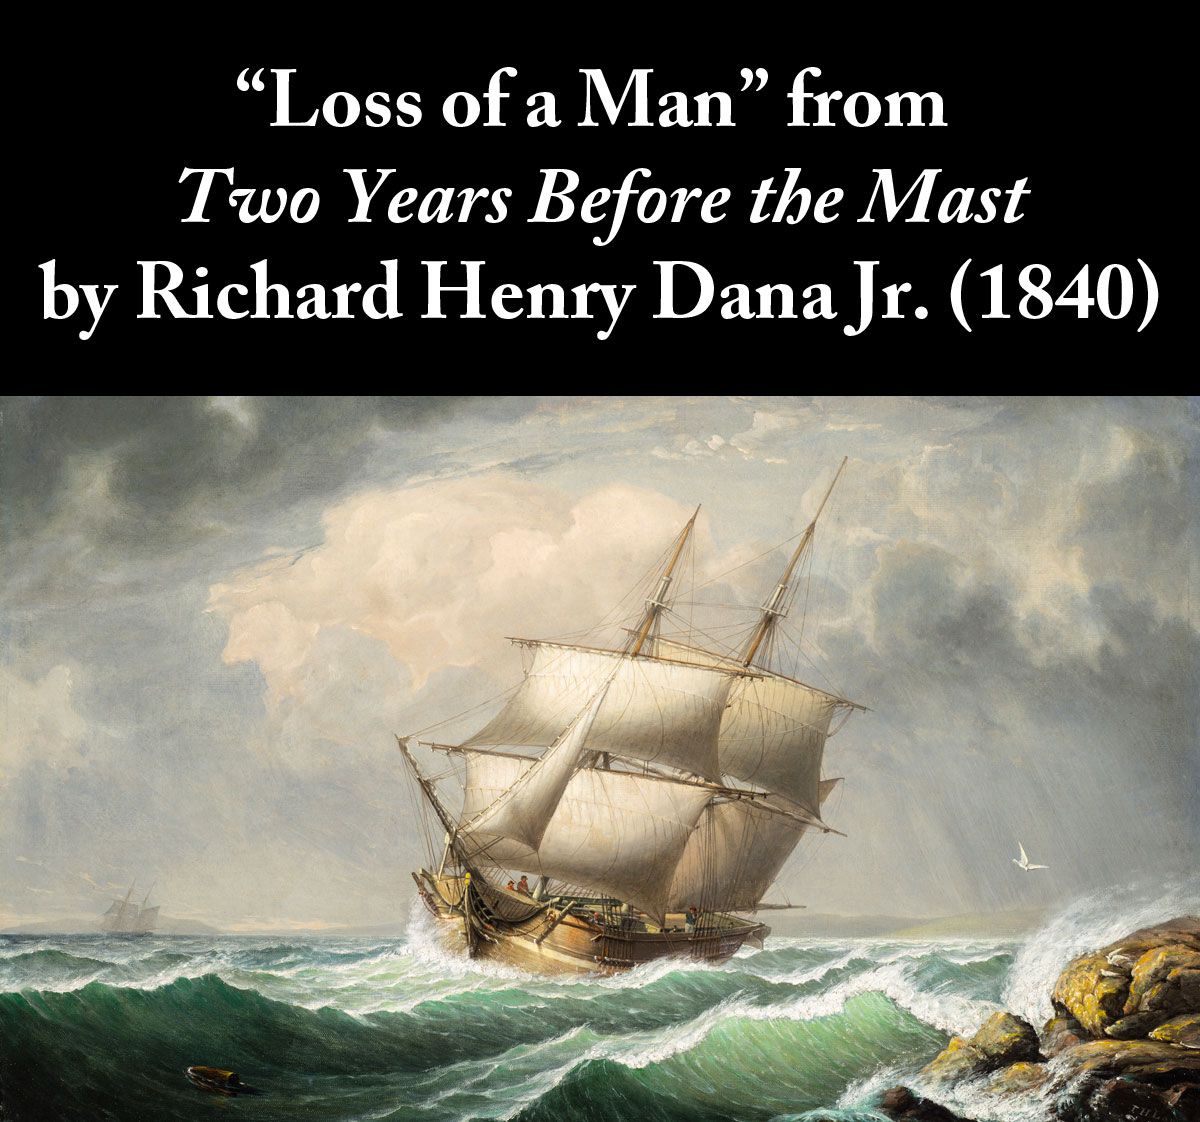 Loss of a Man from Two Years Before the Mast by Richard Henry Dana Jr. (1840)